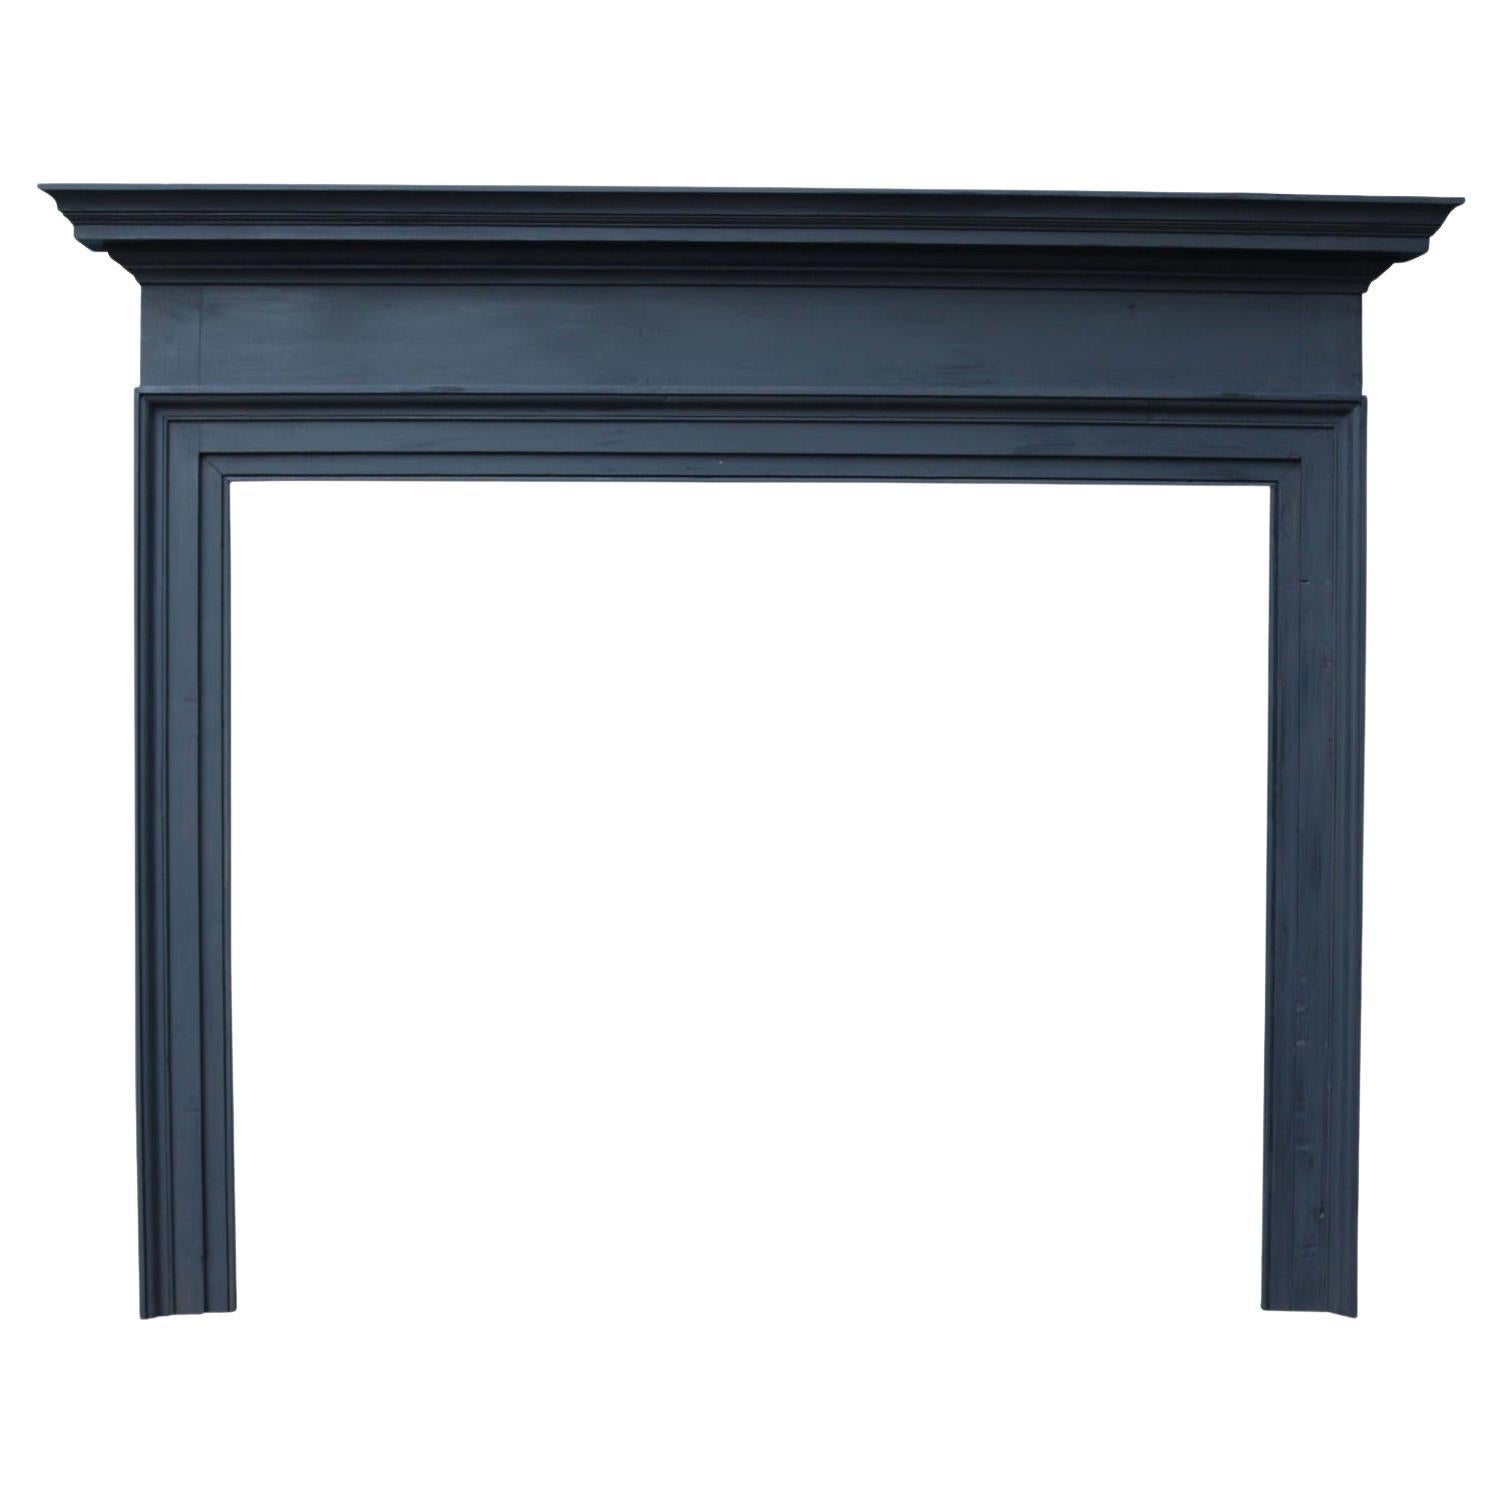 Antique Pine Fireplace Mantel For Sale